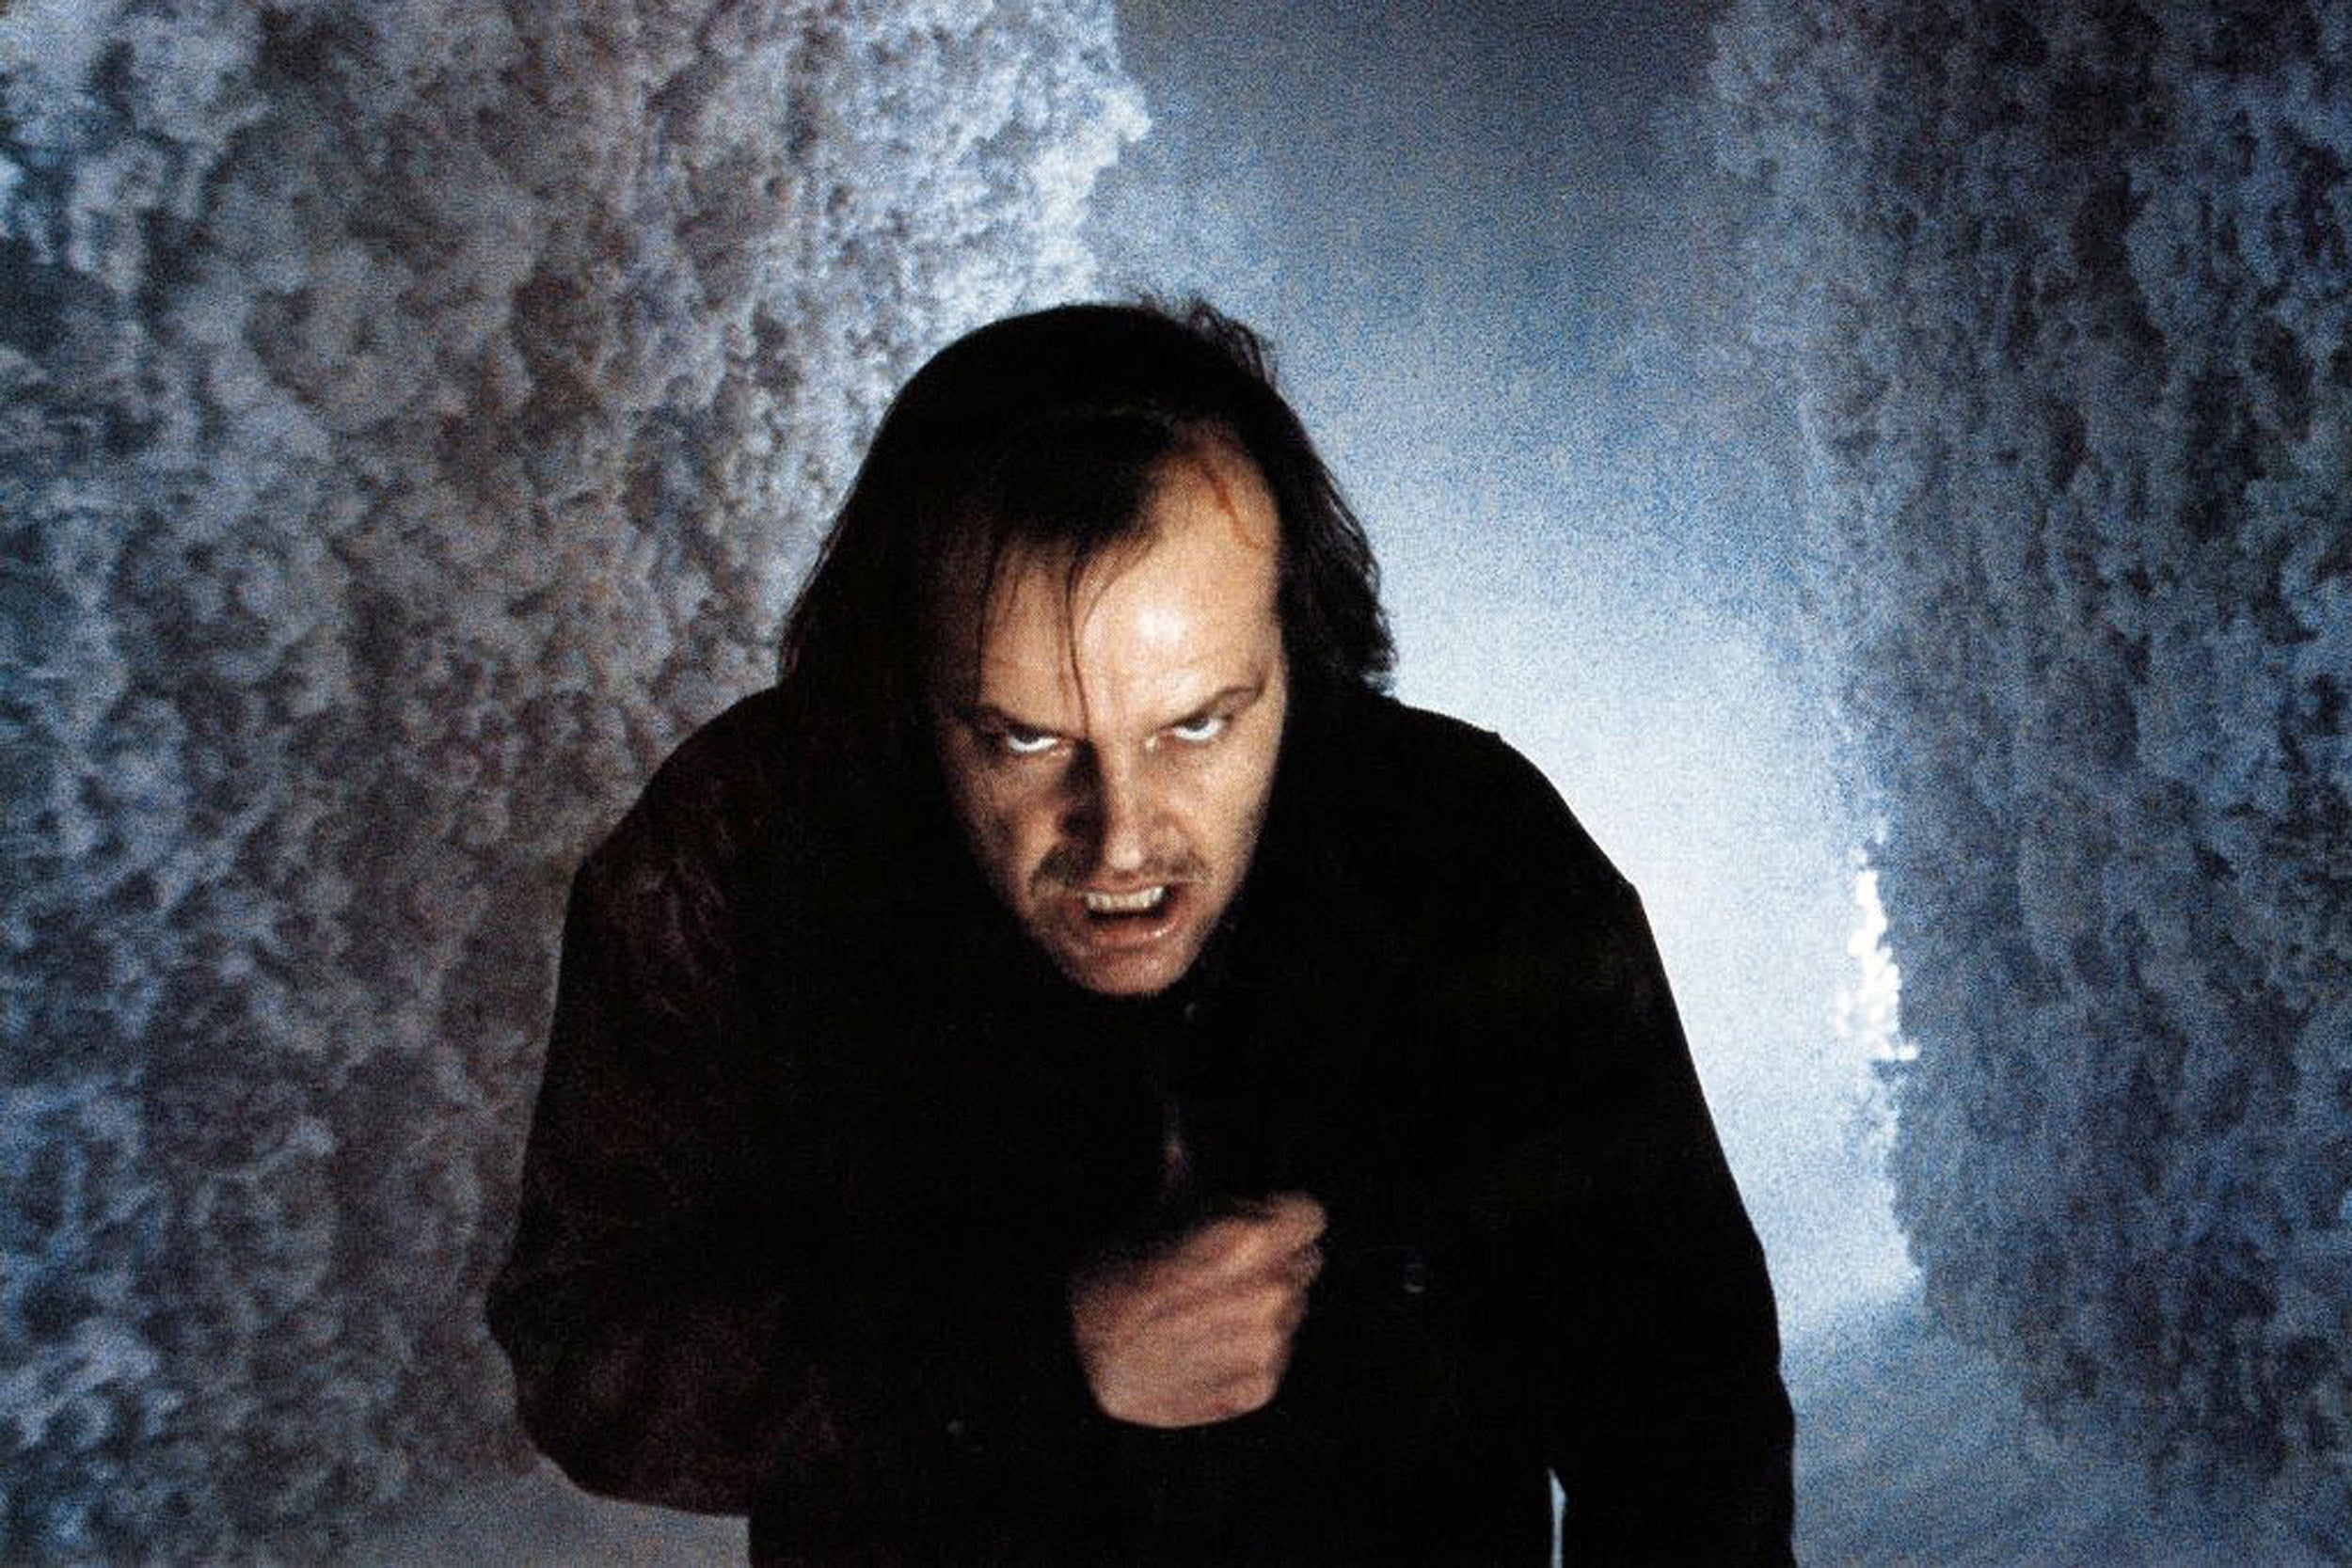 Jack Nicholson in a scene from "The Shining."